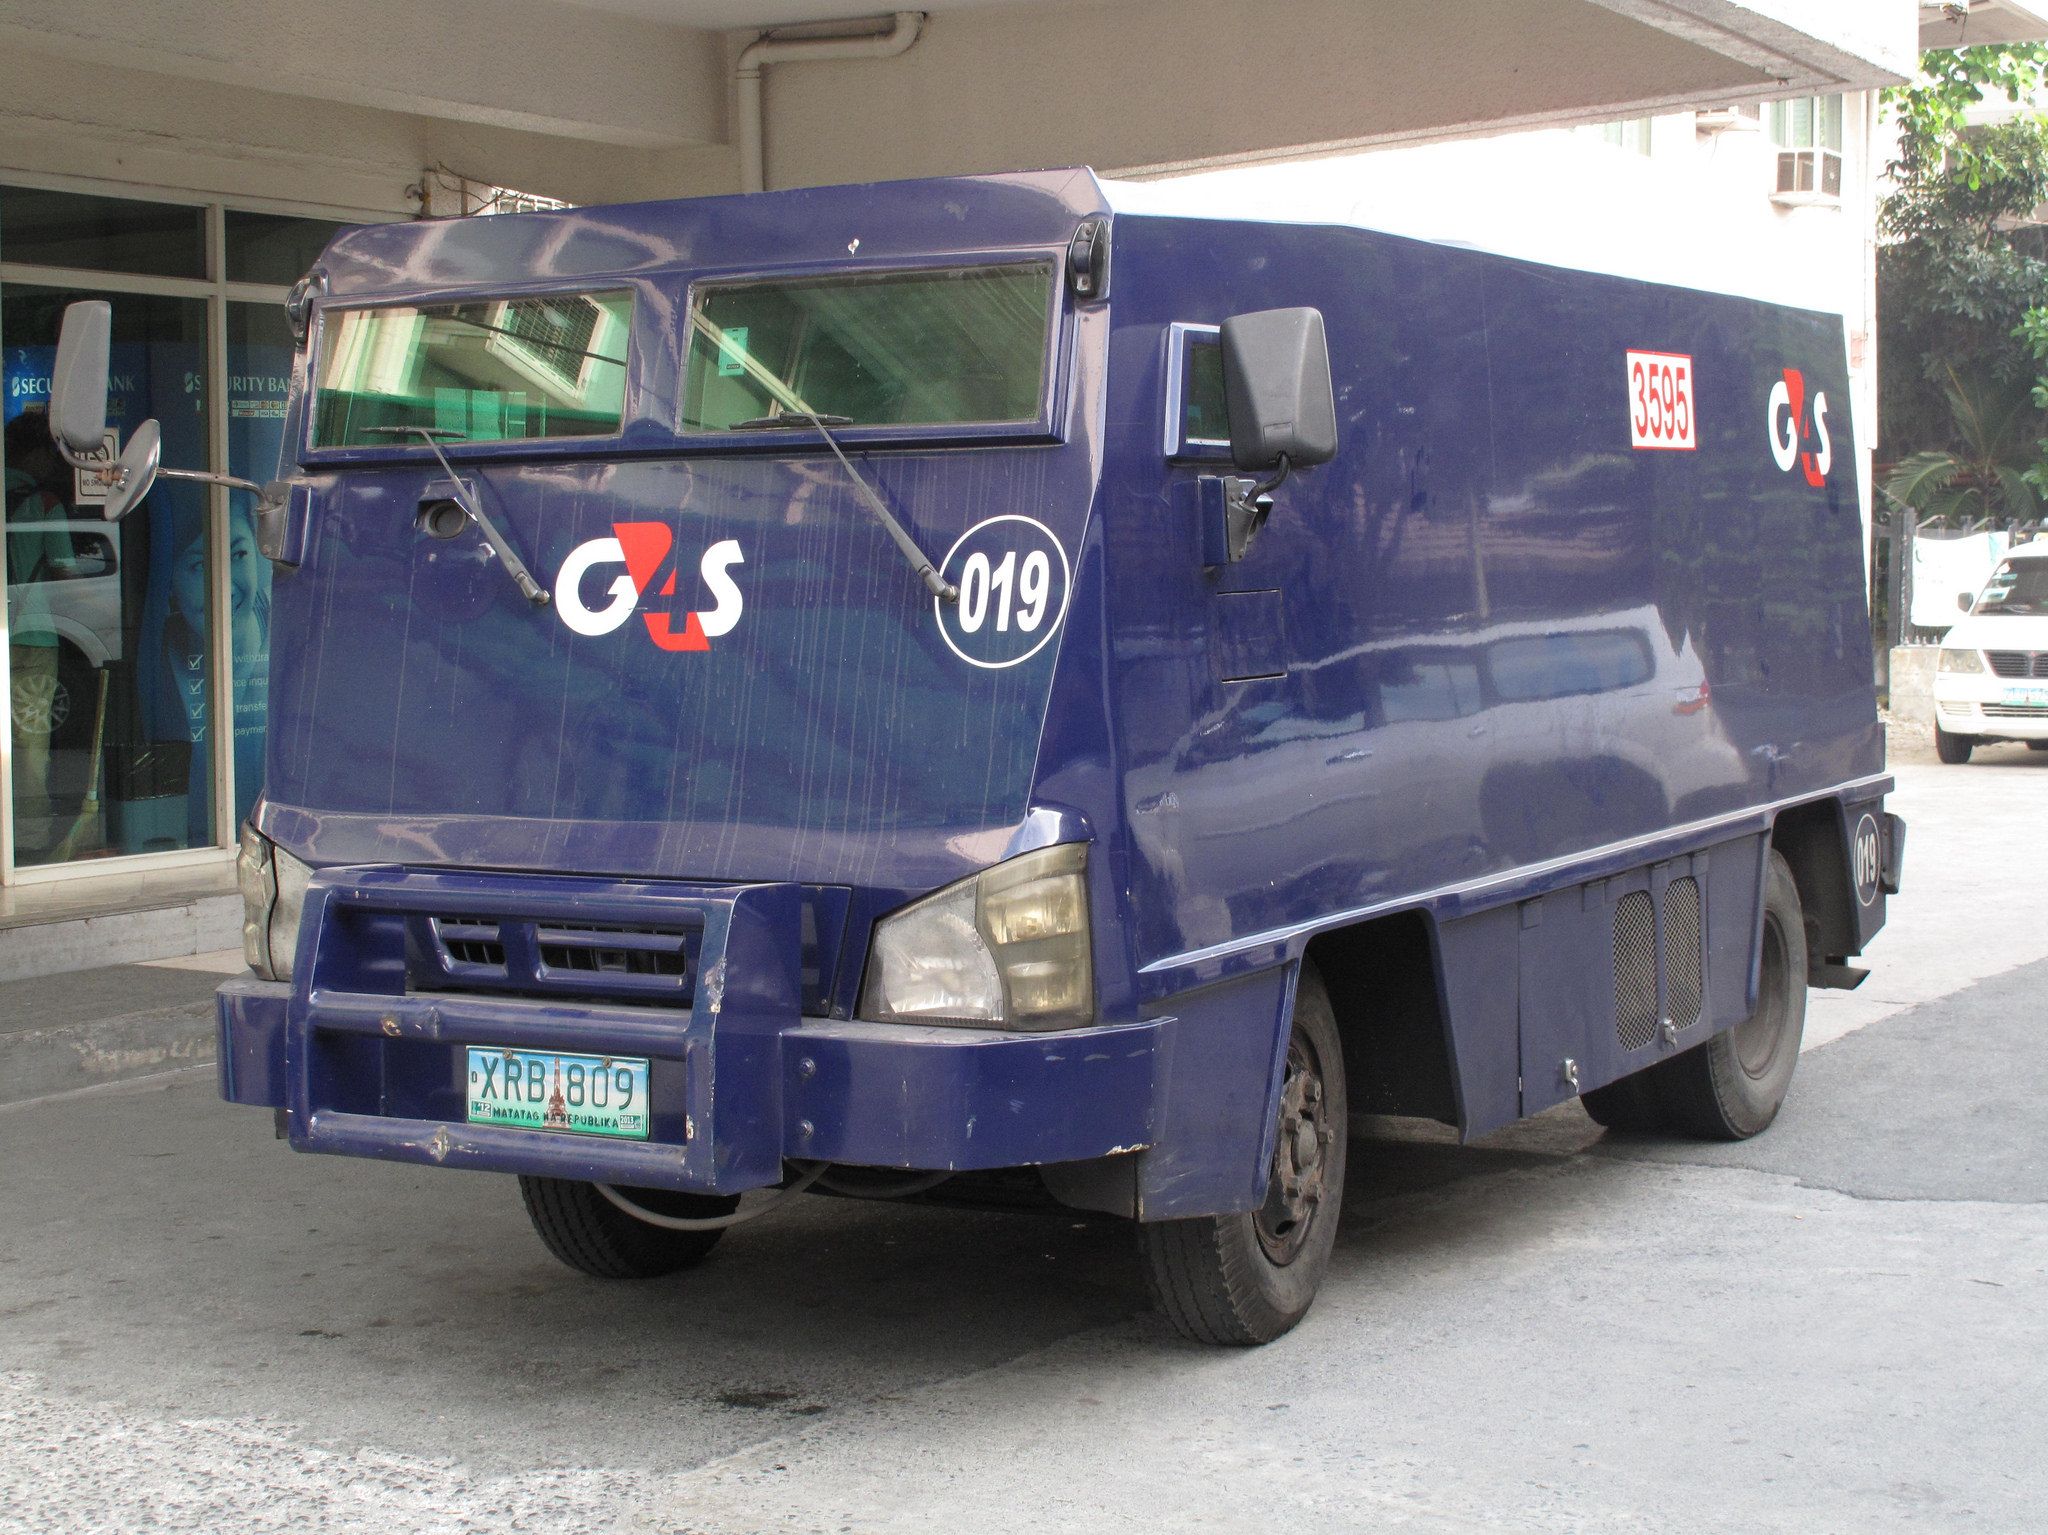 Isuzu armored truck. Flickr commons image by Davocarno. Philippines, 2014.